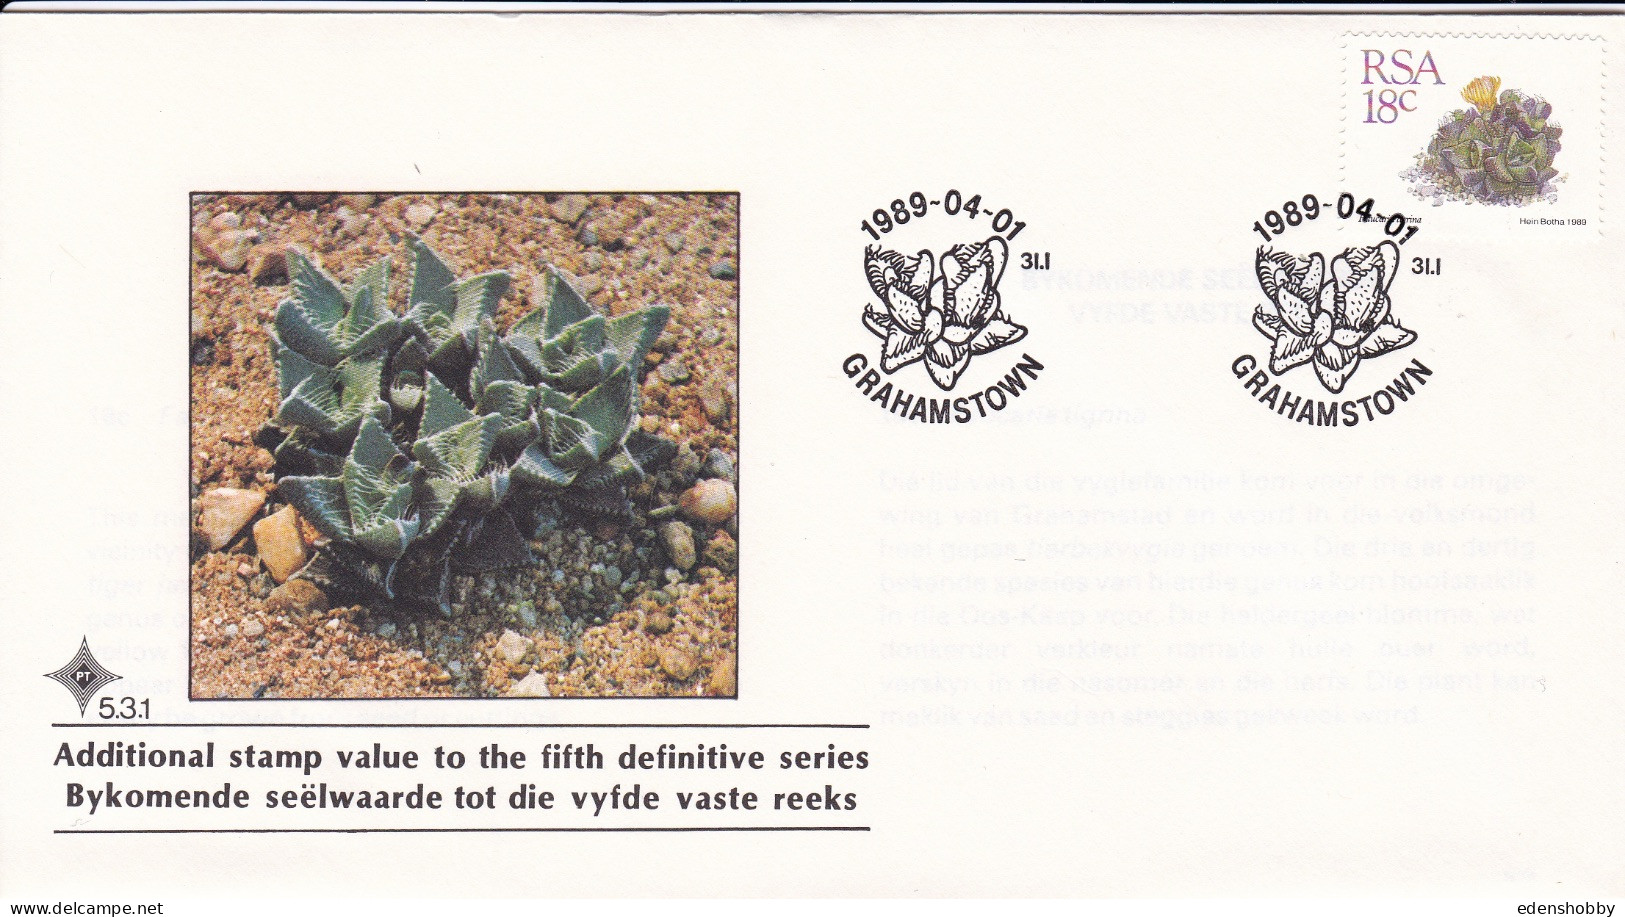 SOUTH AFRICA RSA 1988-89 10 Official First day Covers FDC 4.24 4.25 4.25.1 4.26  S14 5.2 5.3 5.3.1 5.4 5.5